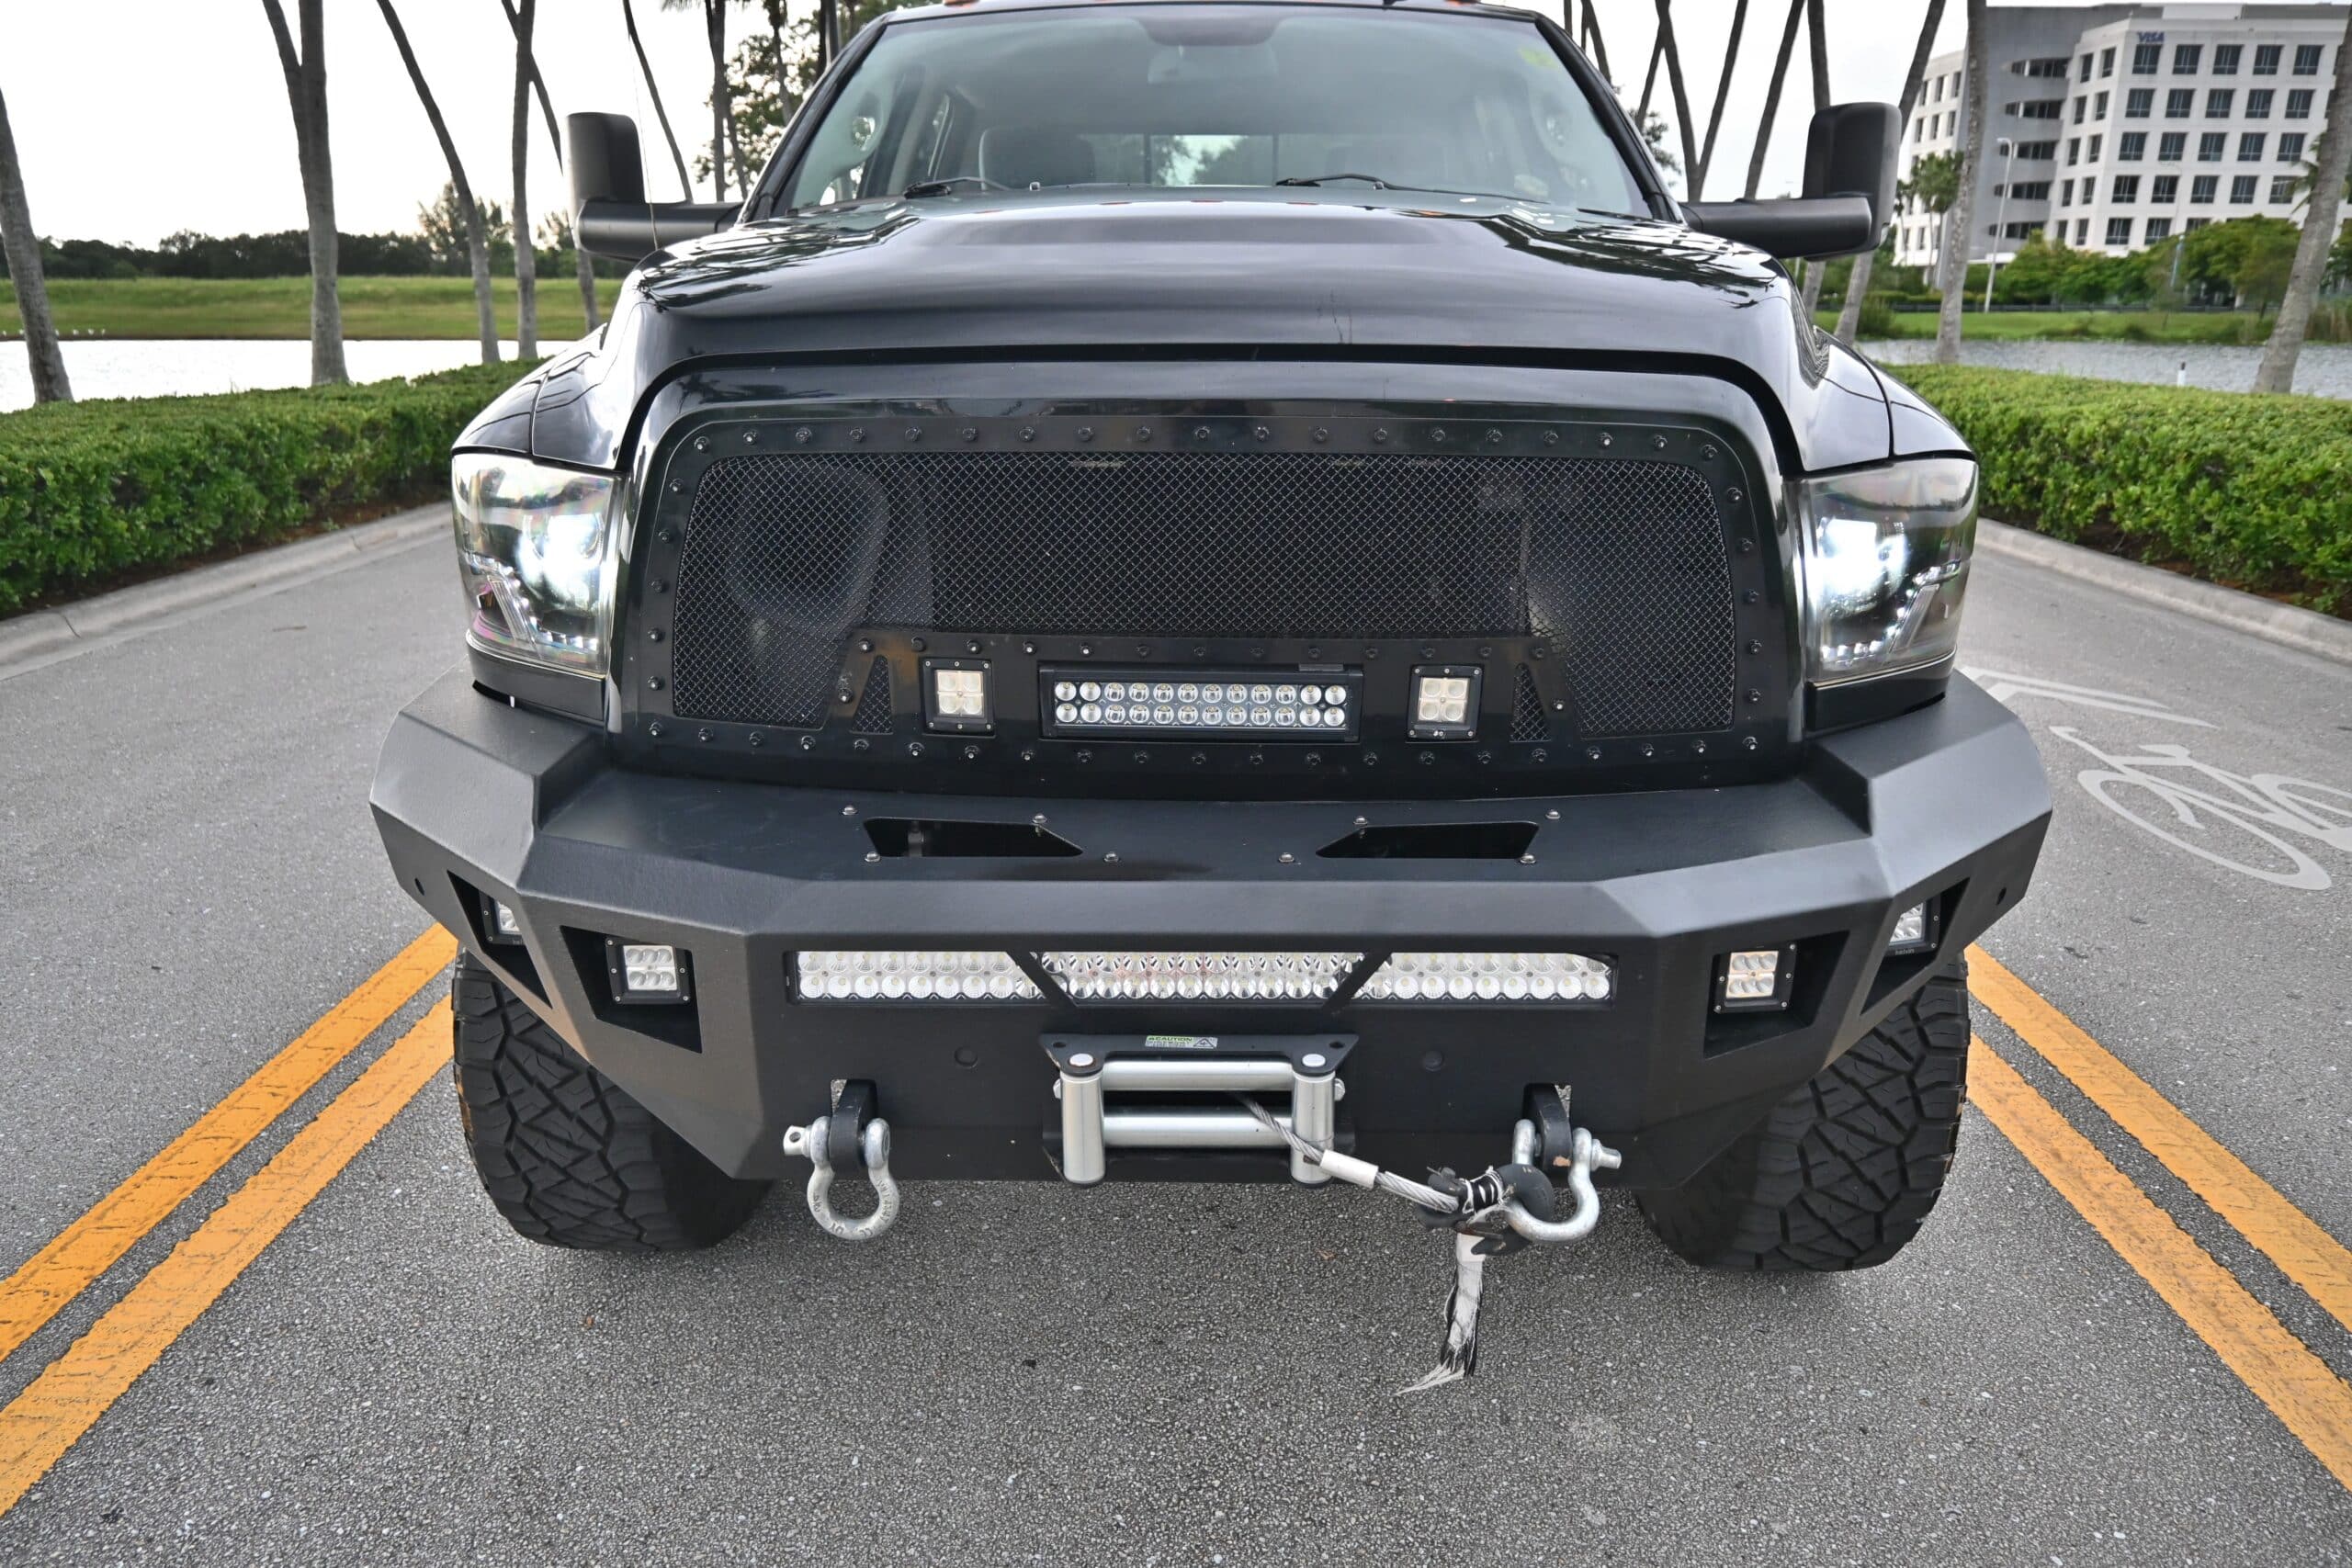 profile cell operator 2014 Dodge Ram 2500 Big Horn Crew Cab 4x4 6.7L Cummins Turbo Diesel - Built  Motor/ Trans - BDS 8 inch lift - 5 Stage Tune - RMCMiami